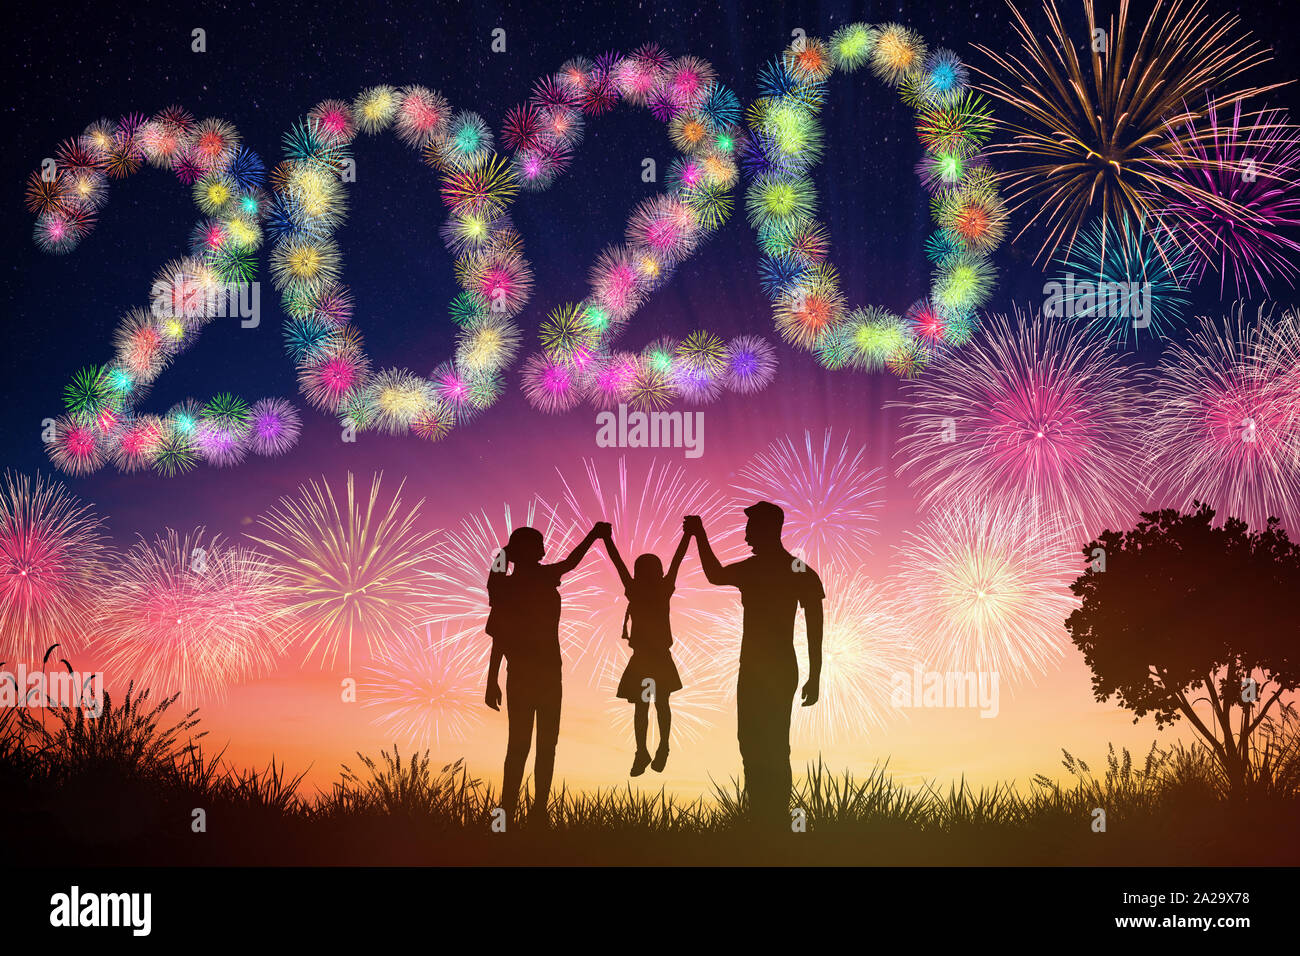 Happy New Year 2020 Concepts Family Watching Fireworks On Hill